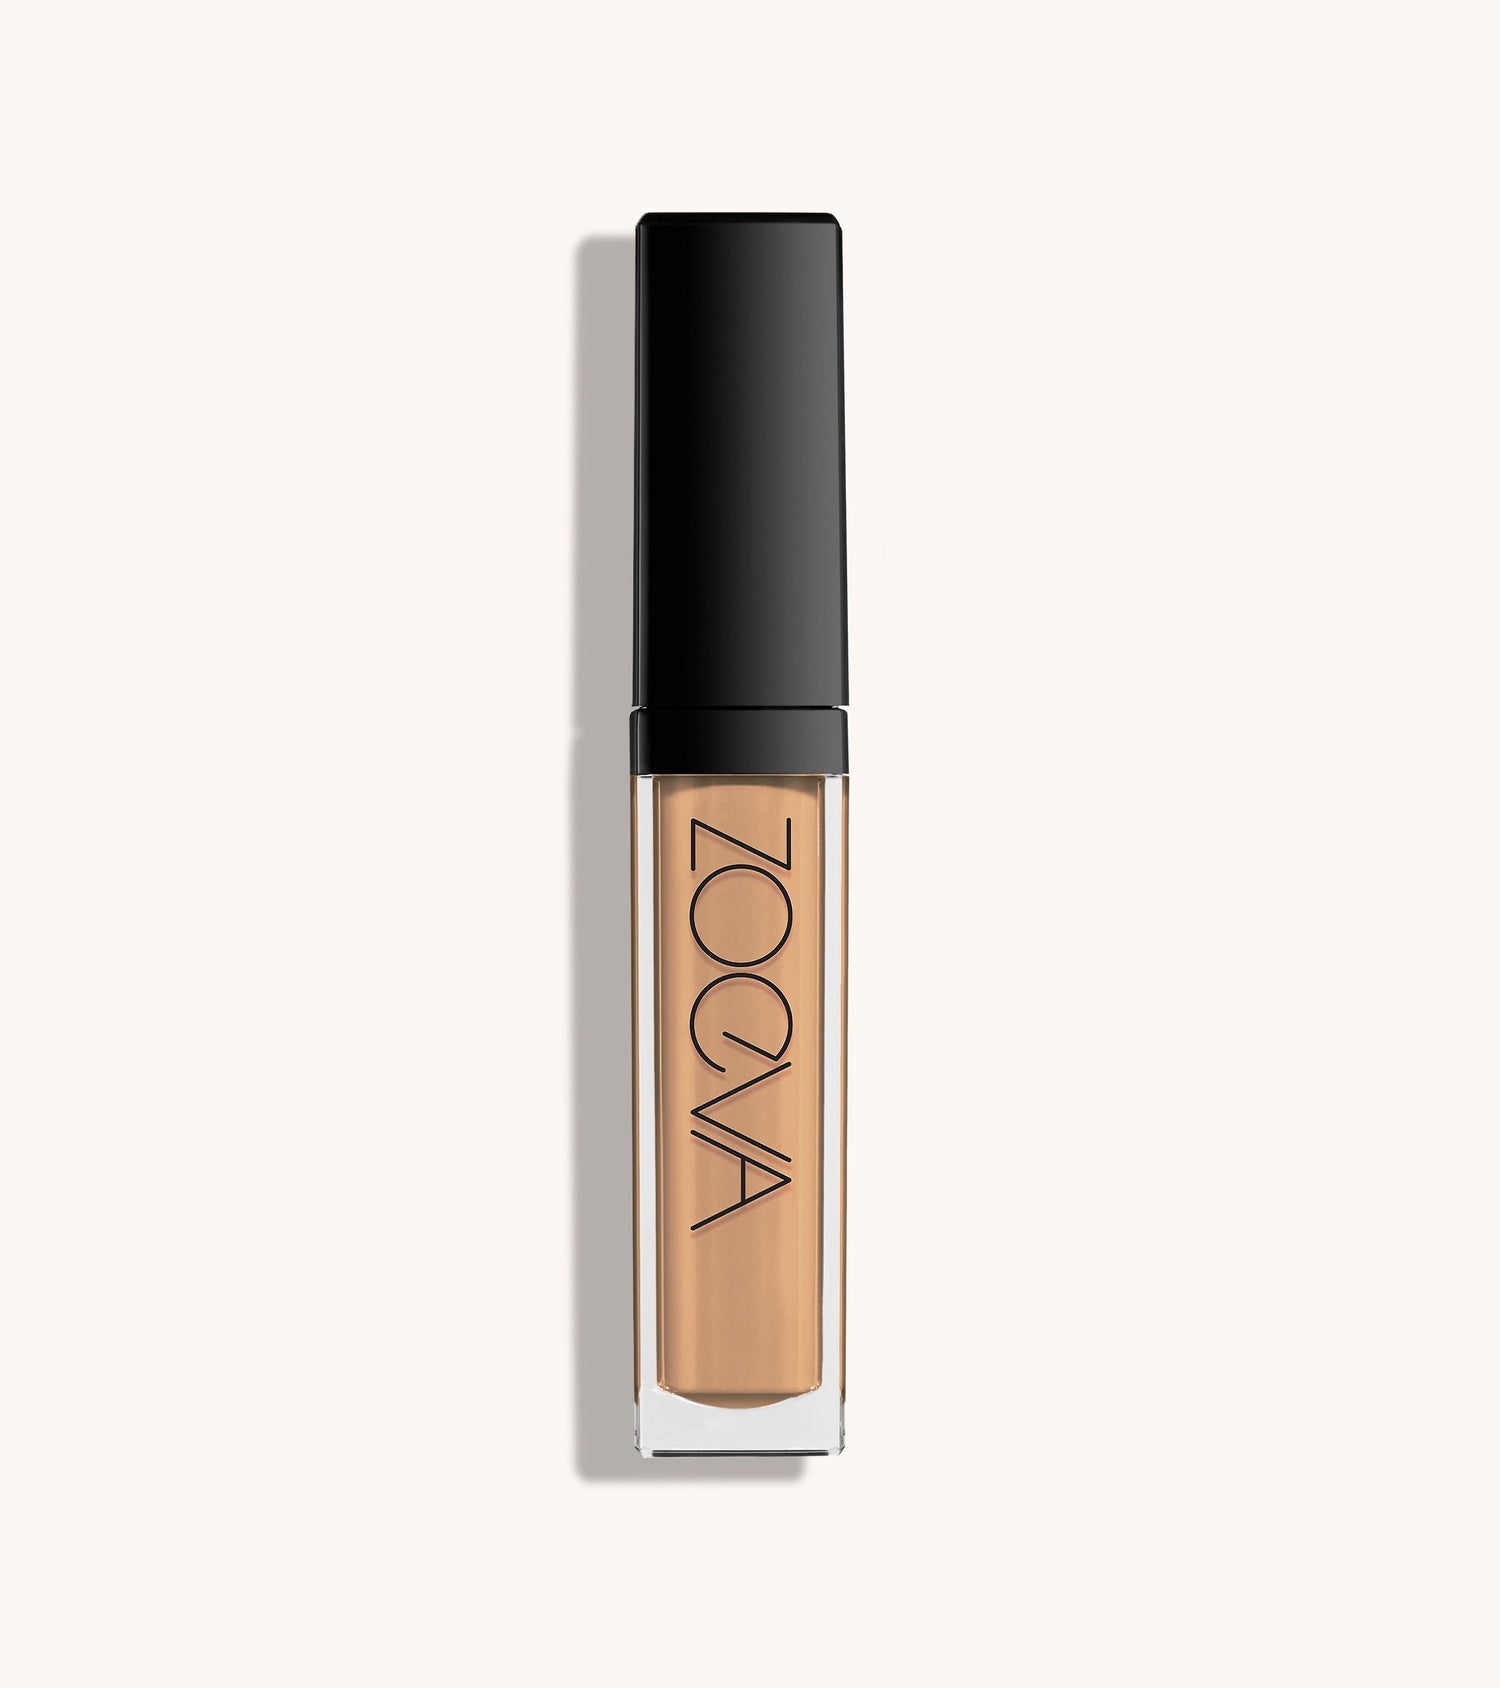 Authentik Skin Perfector Concealer (120 Evident) Main Image featured